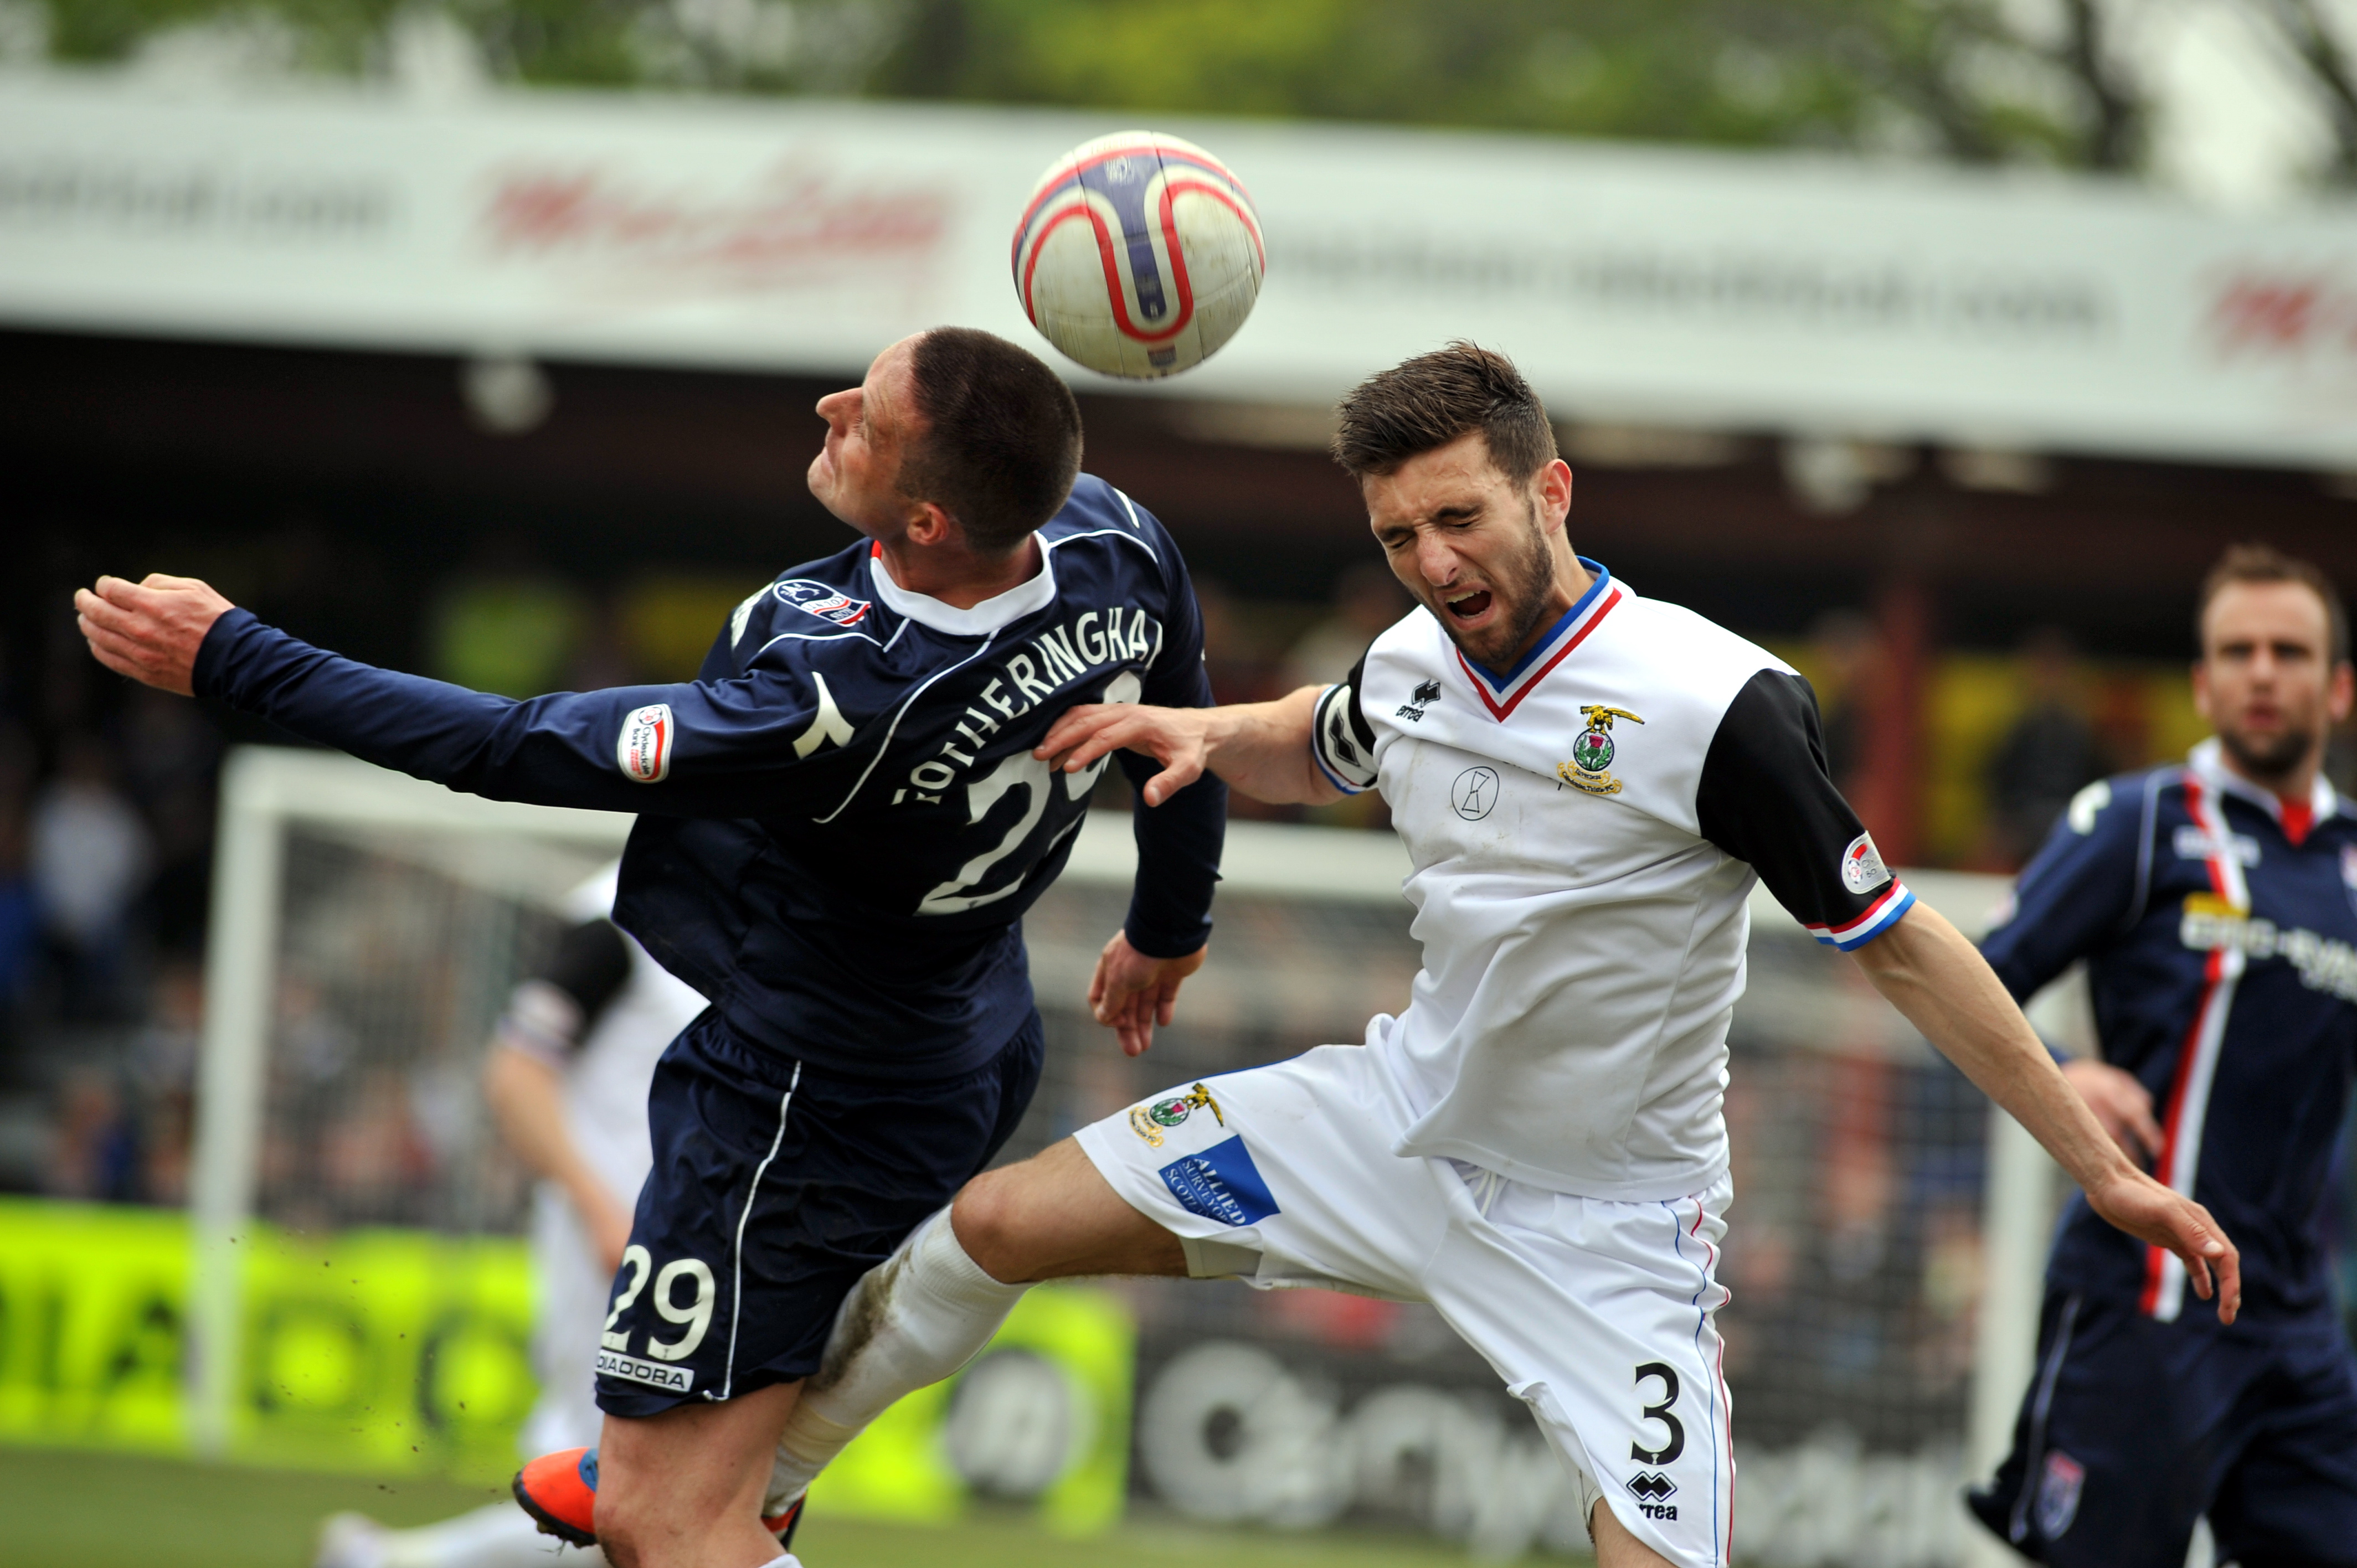 Ross County v Inverness Caledonian Thistle. Ross County's, Mark Fotheringham, left, and Caley Thistle's Graeme Shinnie, right.
Picture by Gordon Lennox